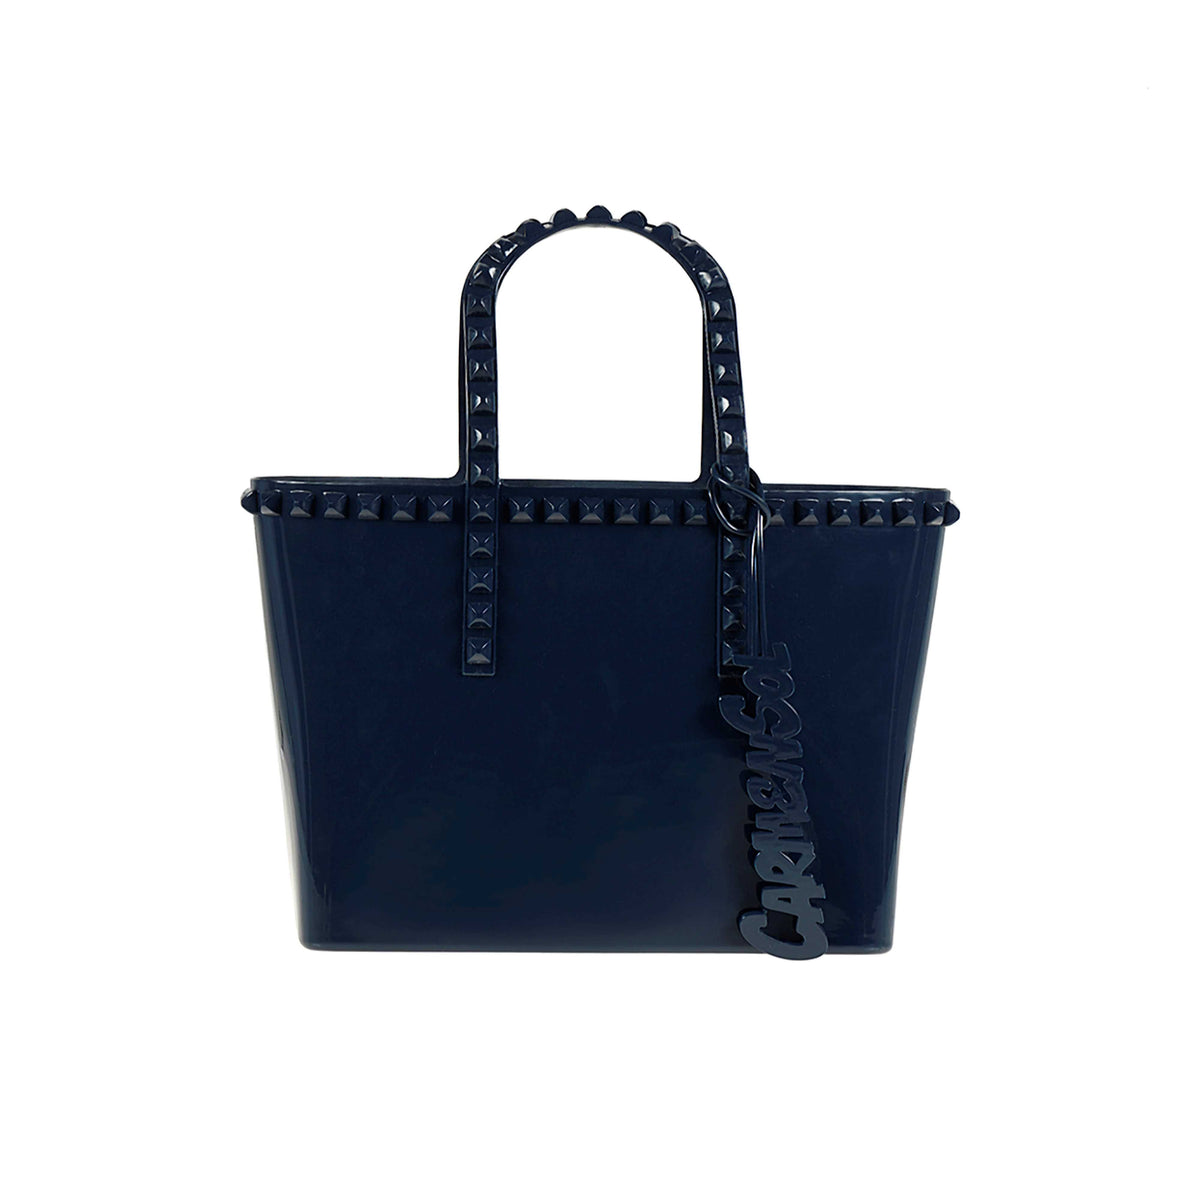 Navy blue mini tote bag for the kids